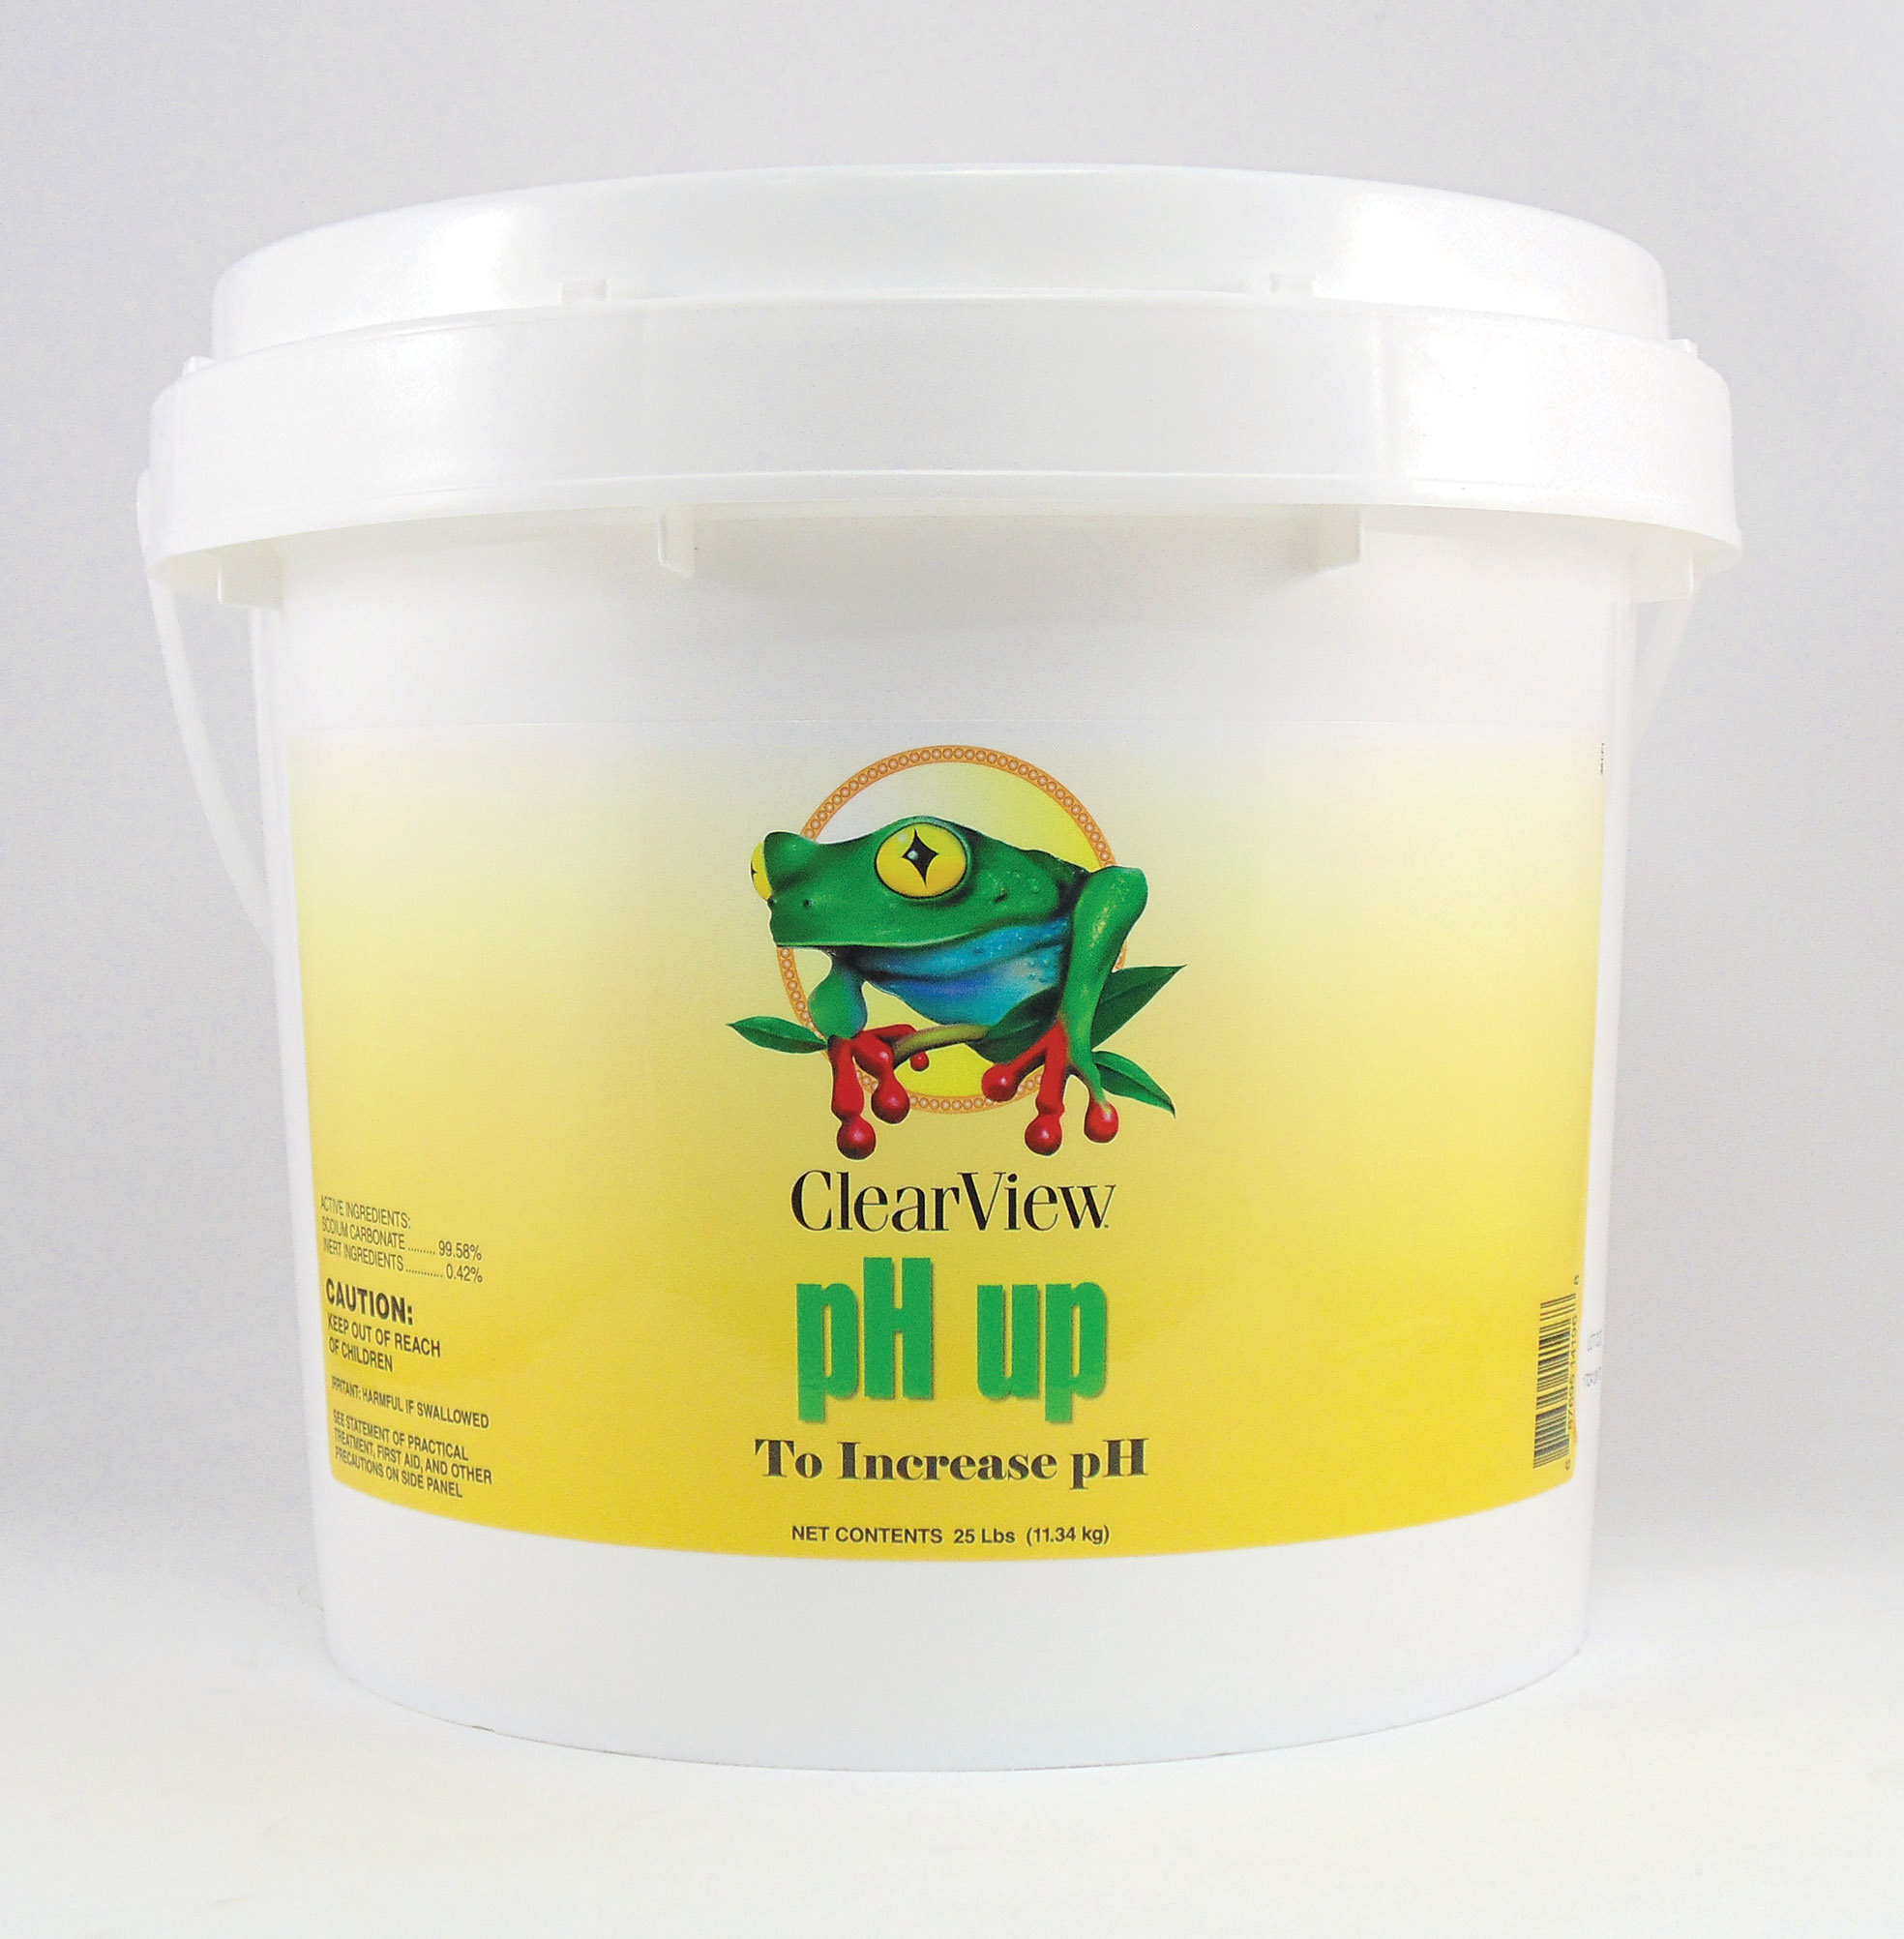 Clearview Ph Up 25 lb Pail